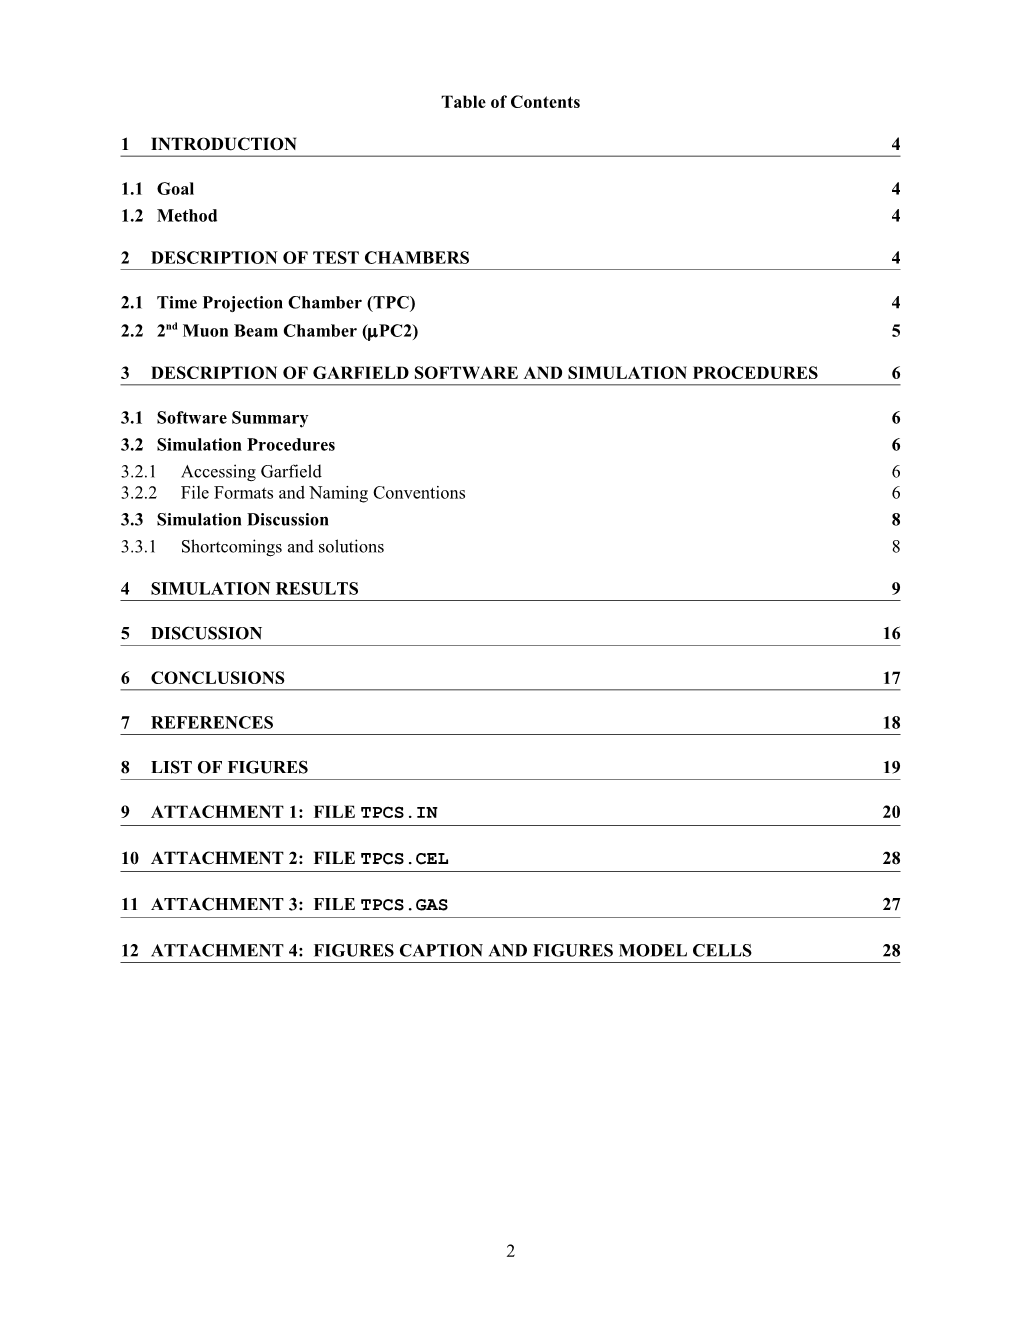 Table of Contents s301